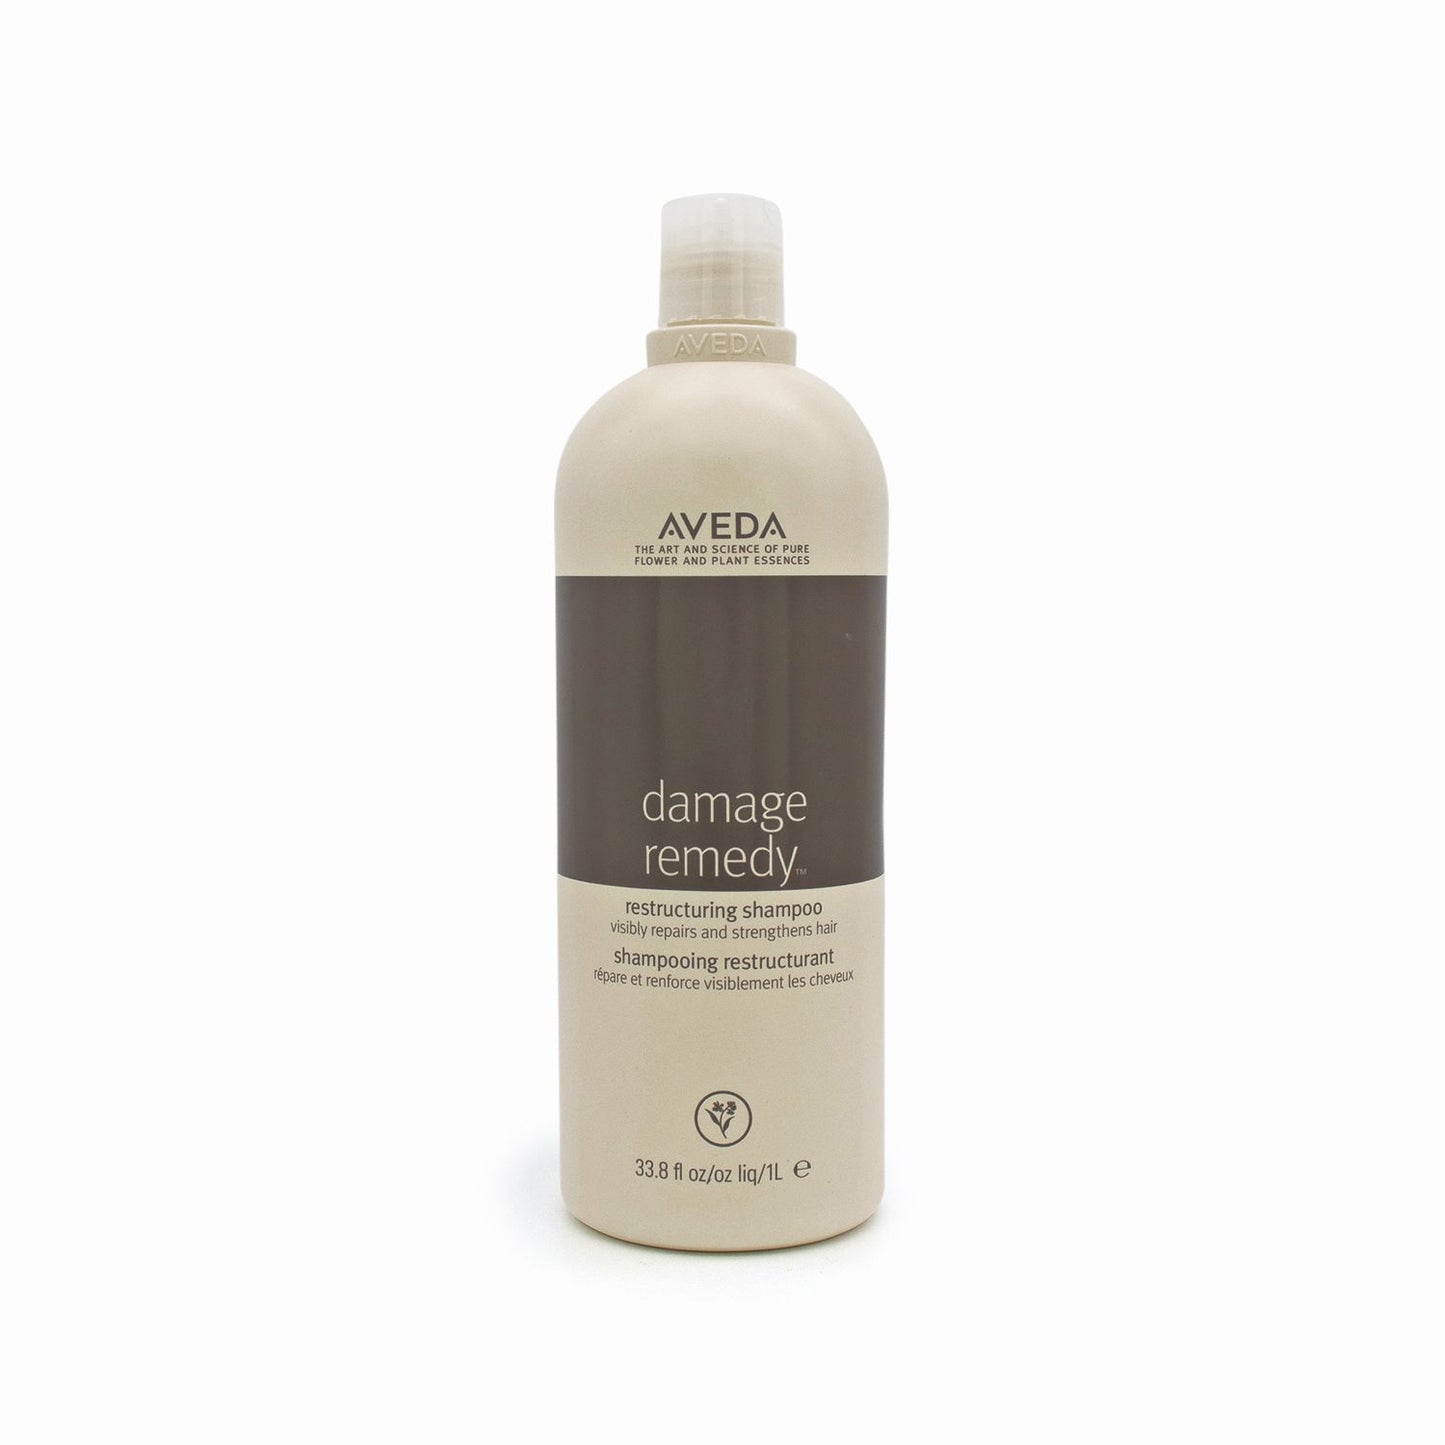 Aveda Damage Remedy Restructuring Shampoo 1000ml - Imperfect Container